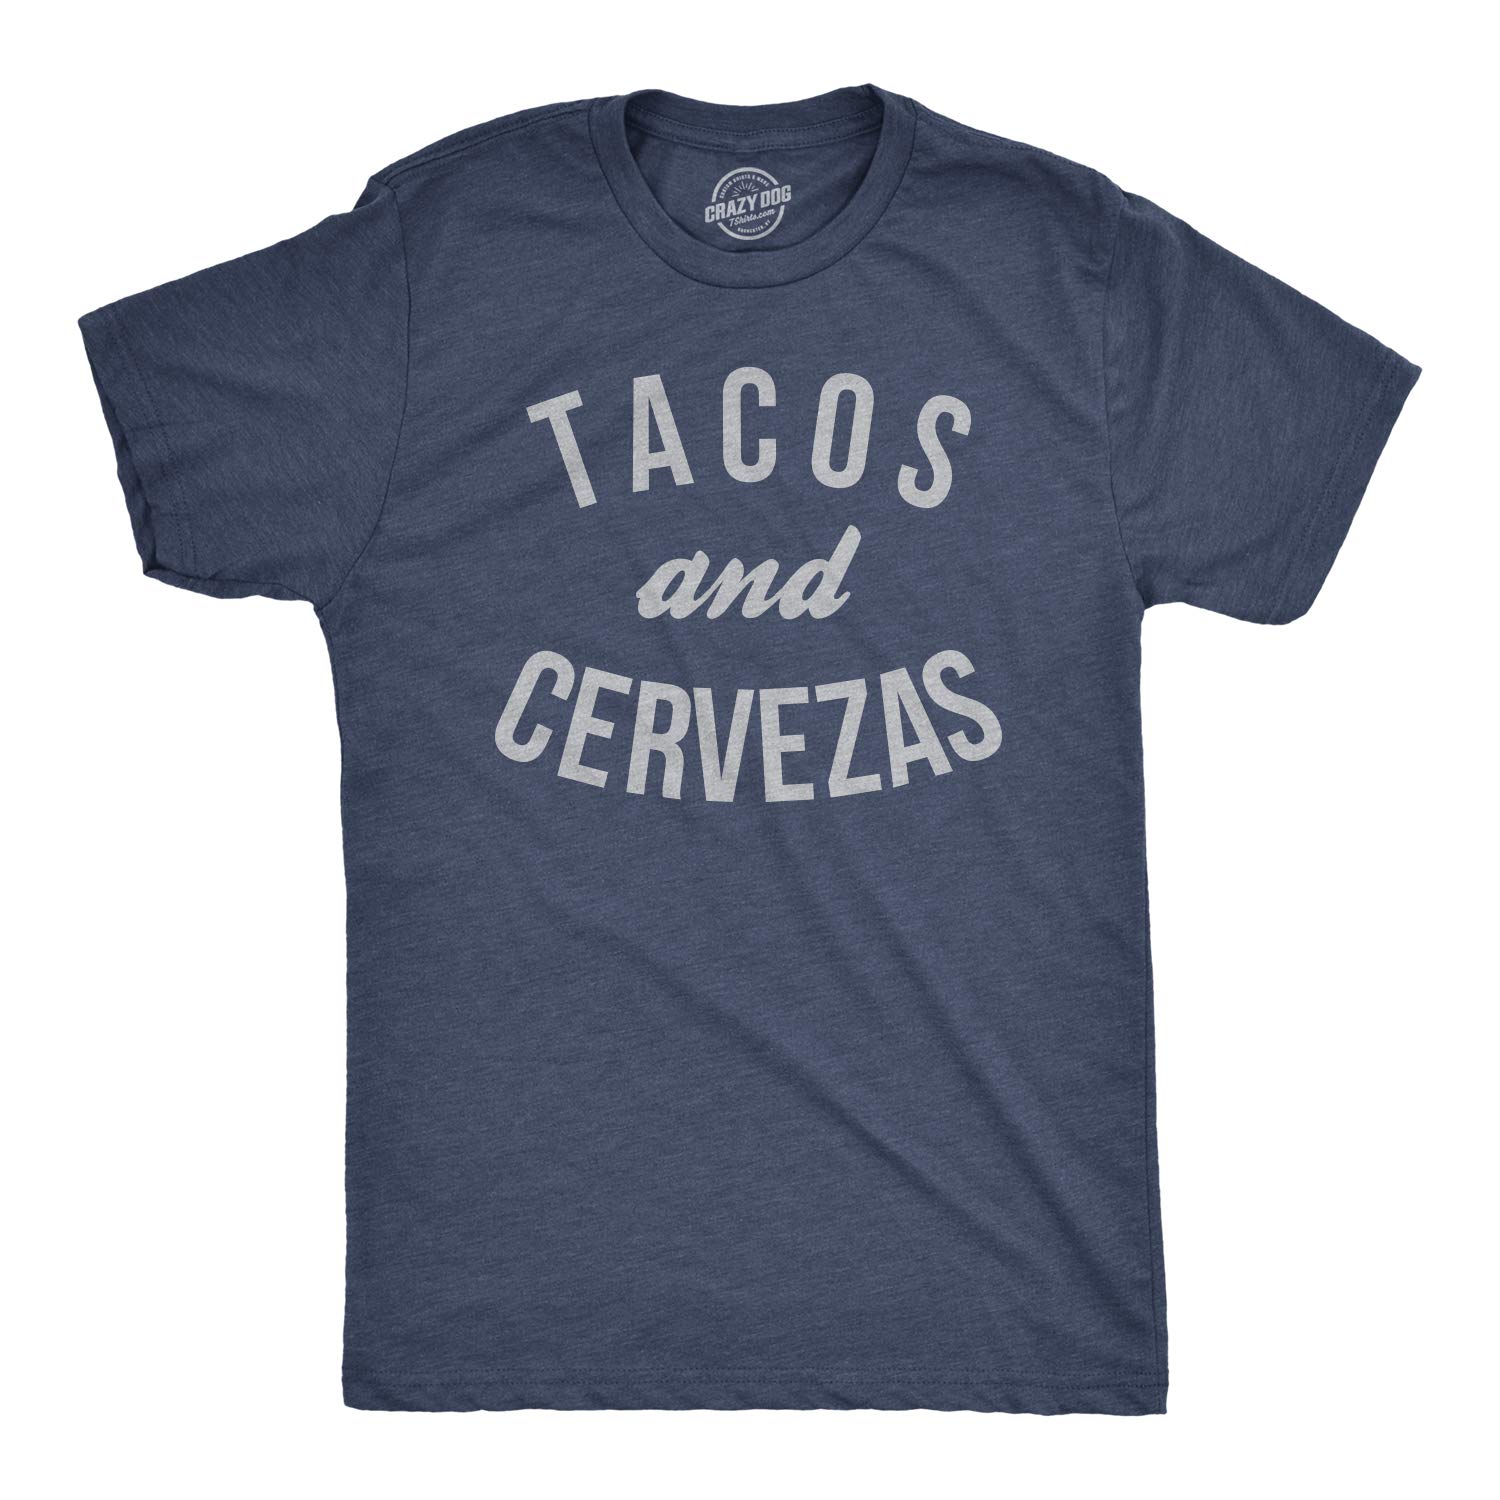 Mens Tacos and Cervezas Funny T Shirt for Vacation Sarcastic Humor Graphic Top